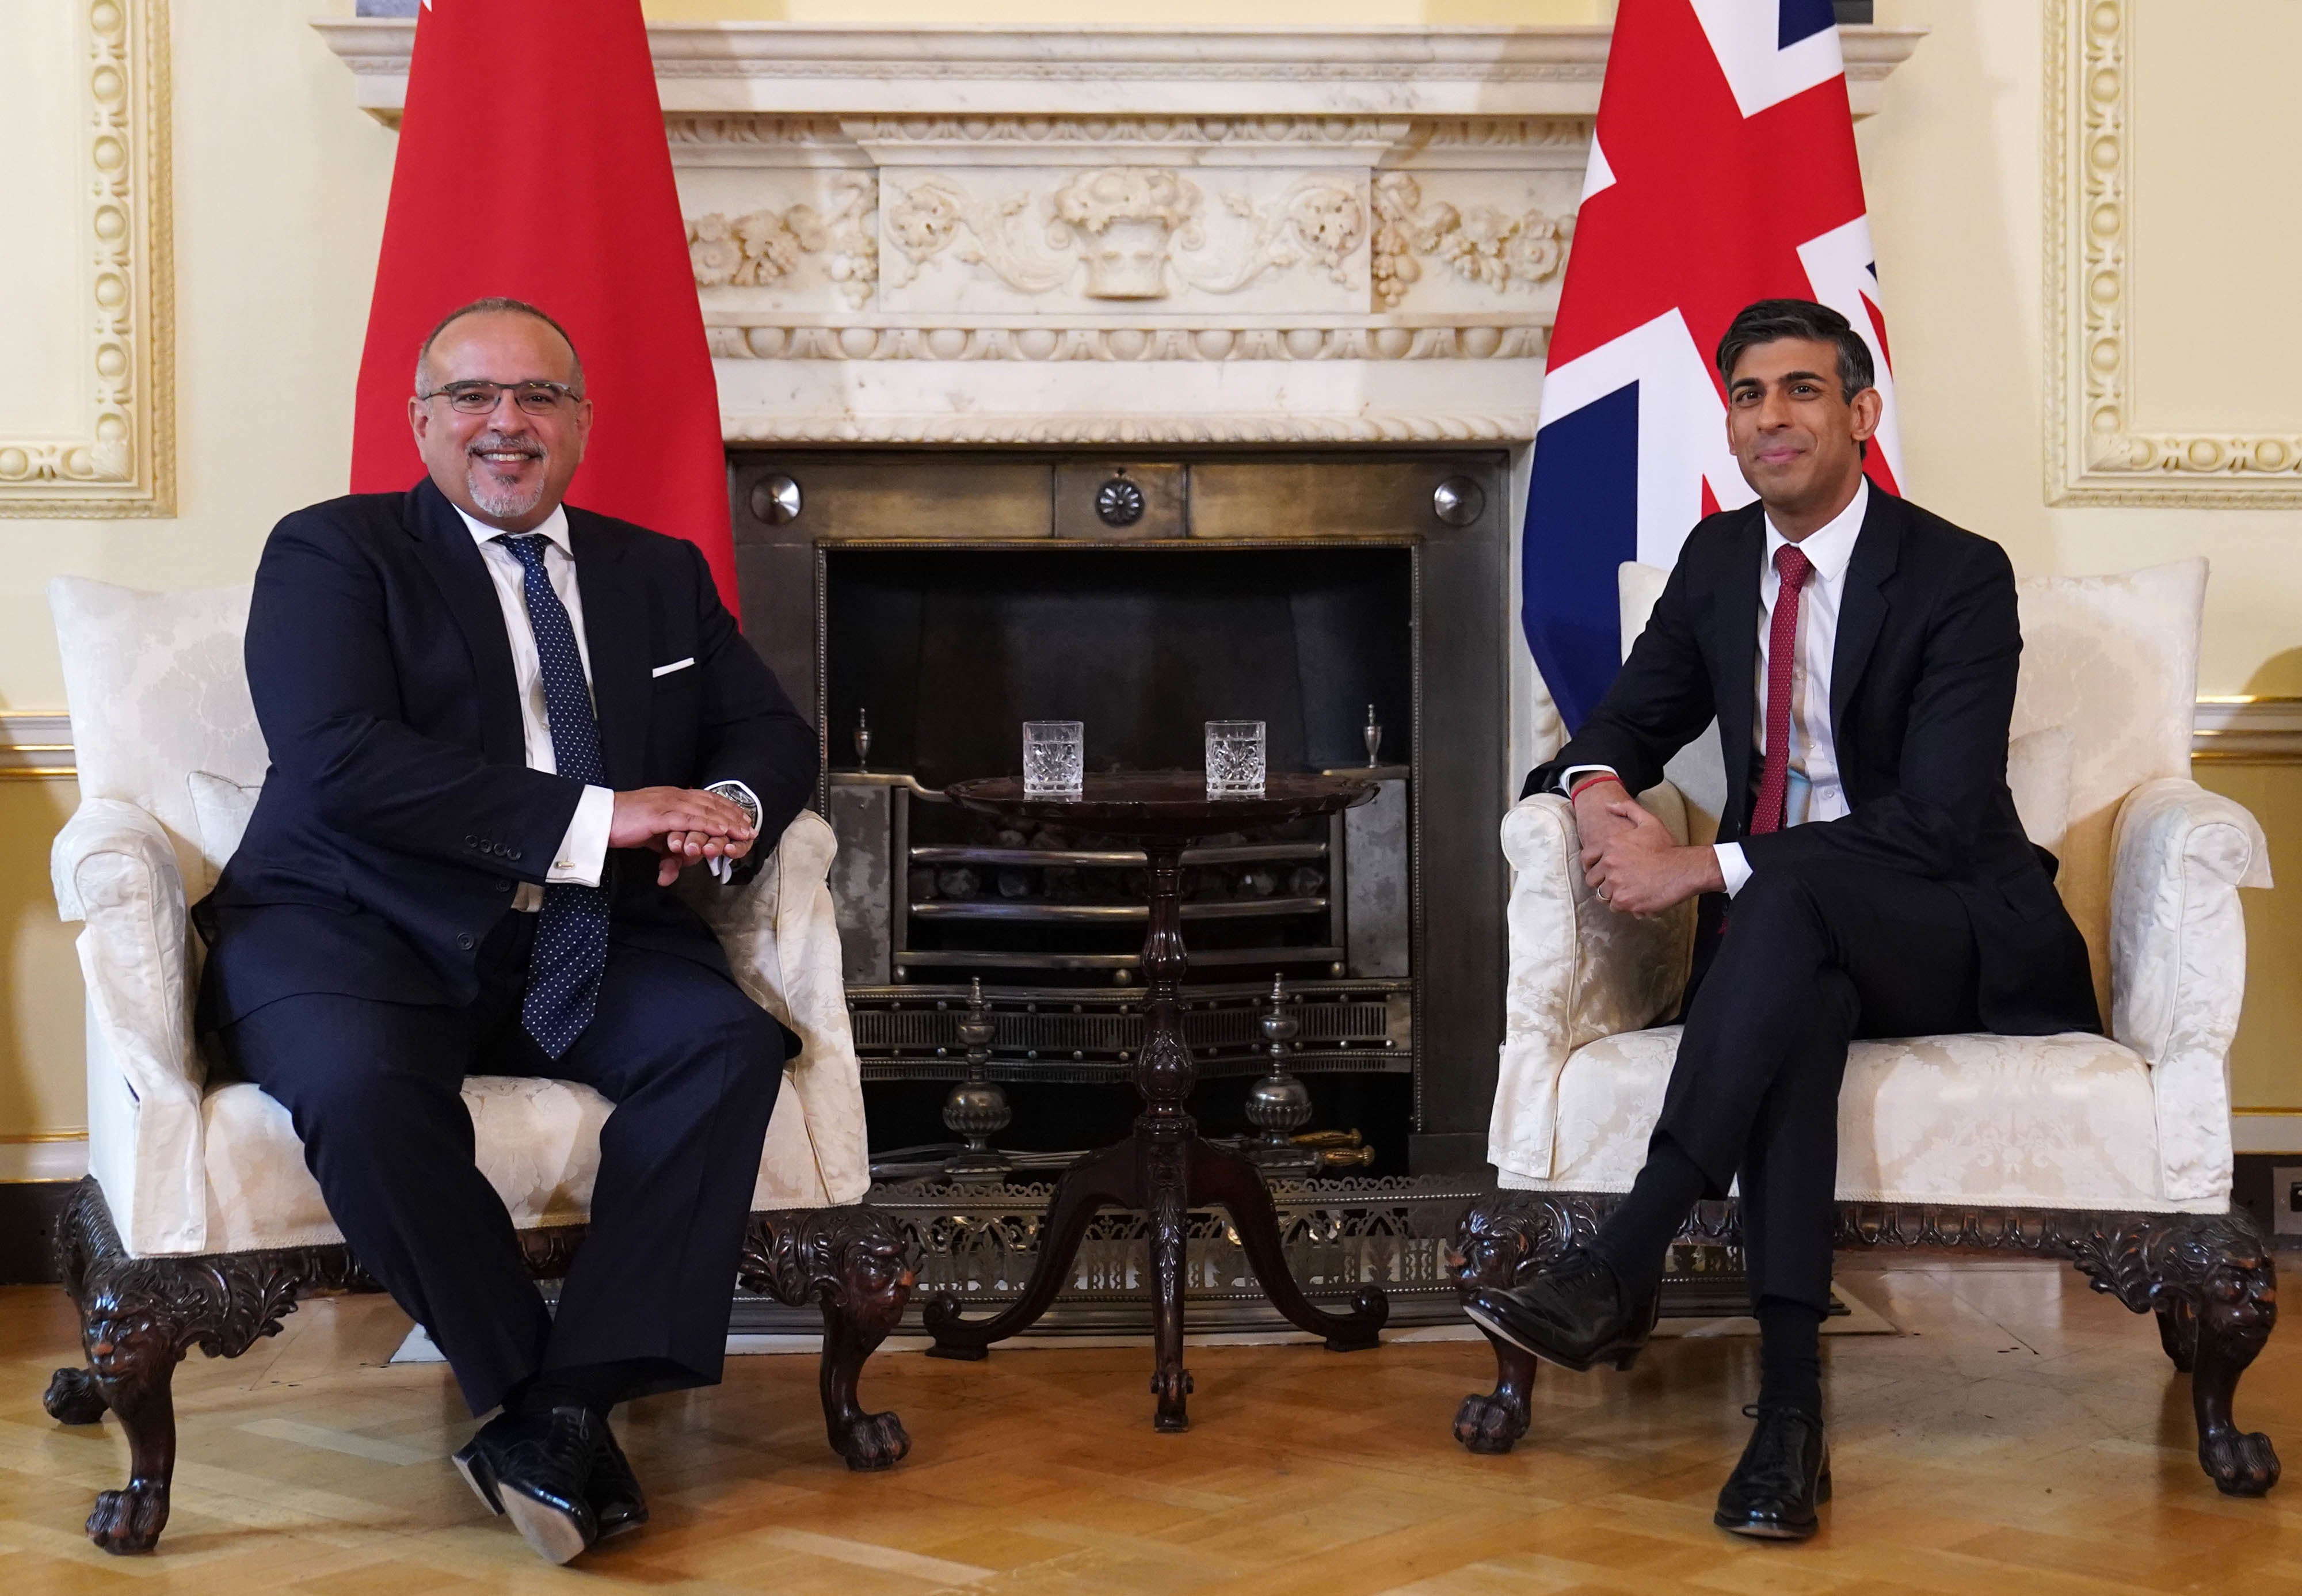 Prime Minister Rishi Sunak (right) with the Crown Prince of Bahrain, Salman bin Hamad Al Khalifa at 10 Downing Street in July 2023.